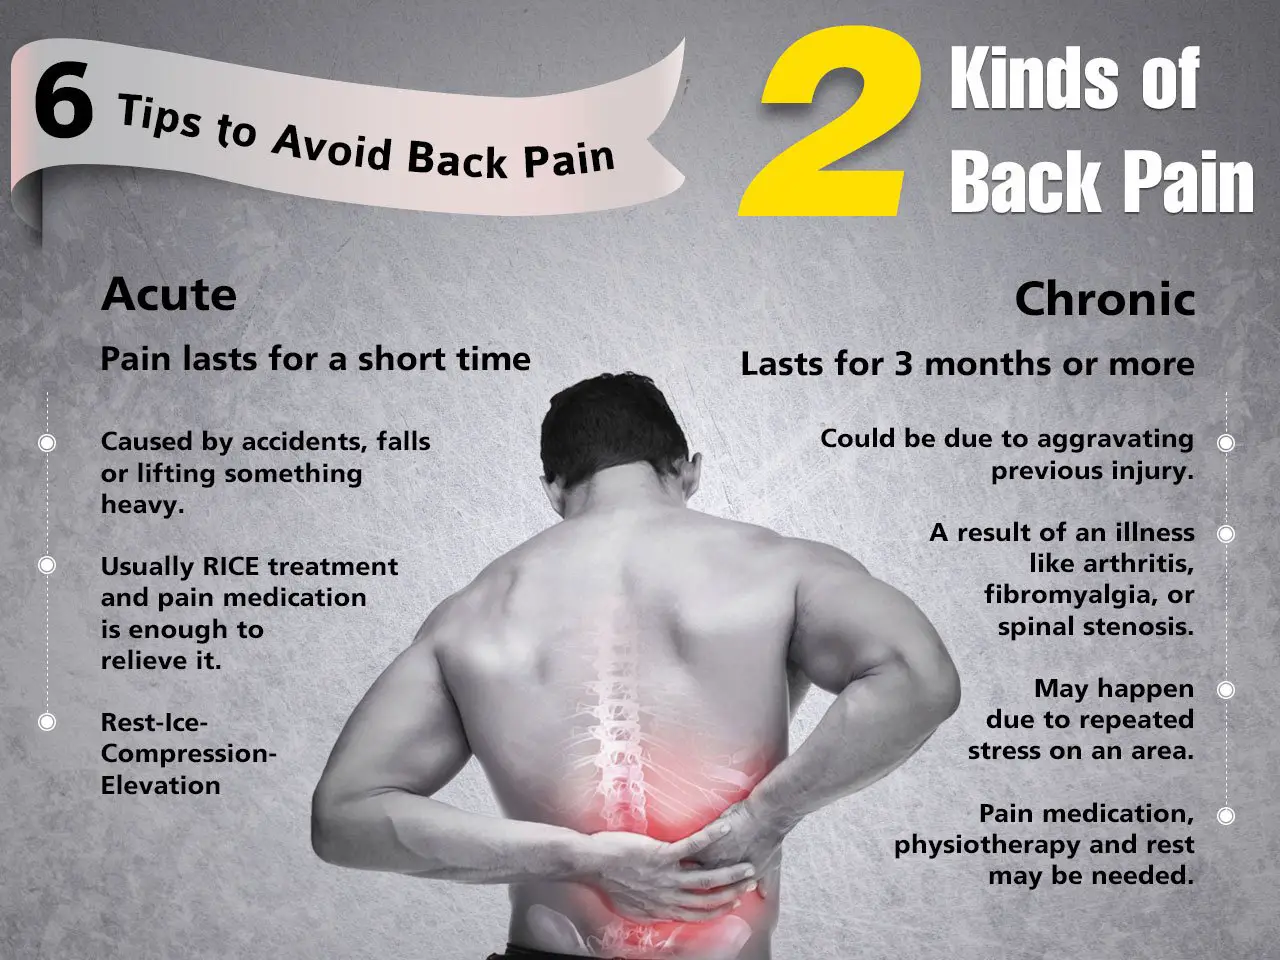 6 Tips to avoid Back Pain